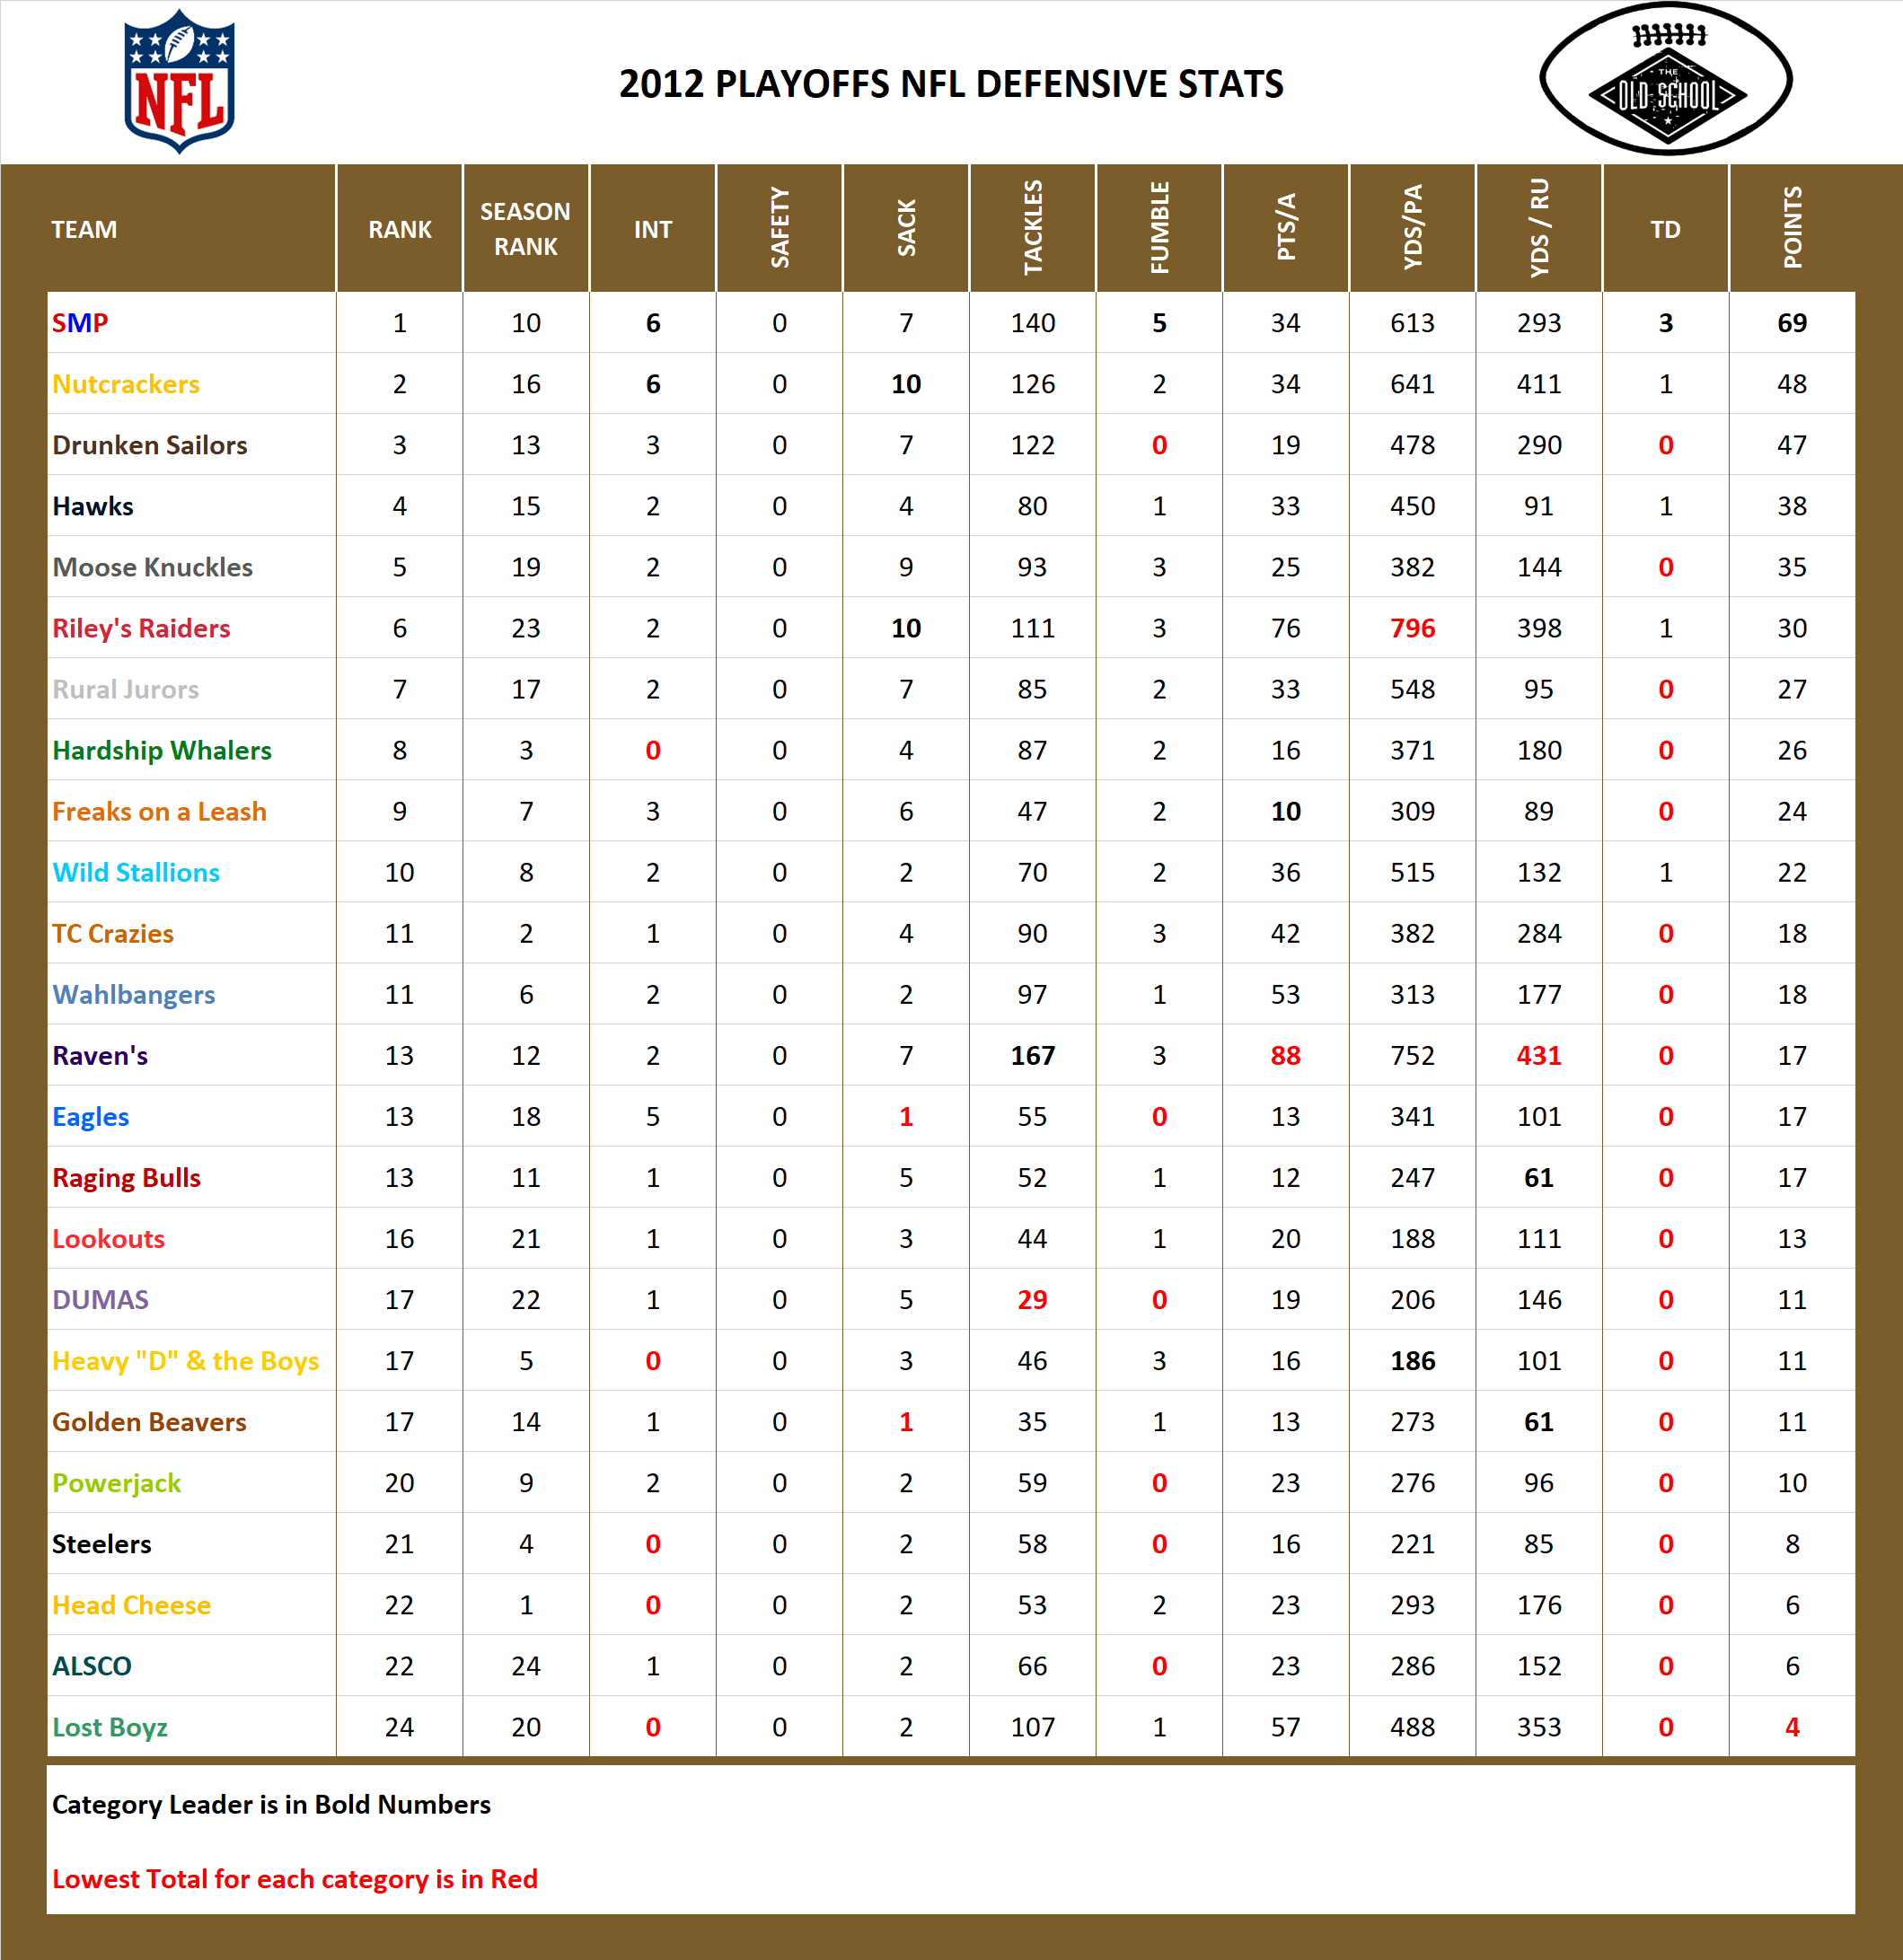 2012 National Football League Pool Playoff Defensive Stats